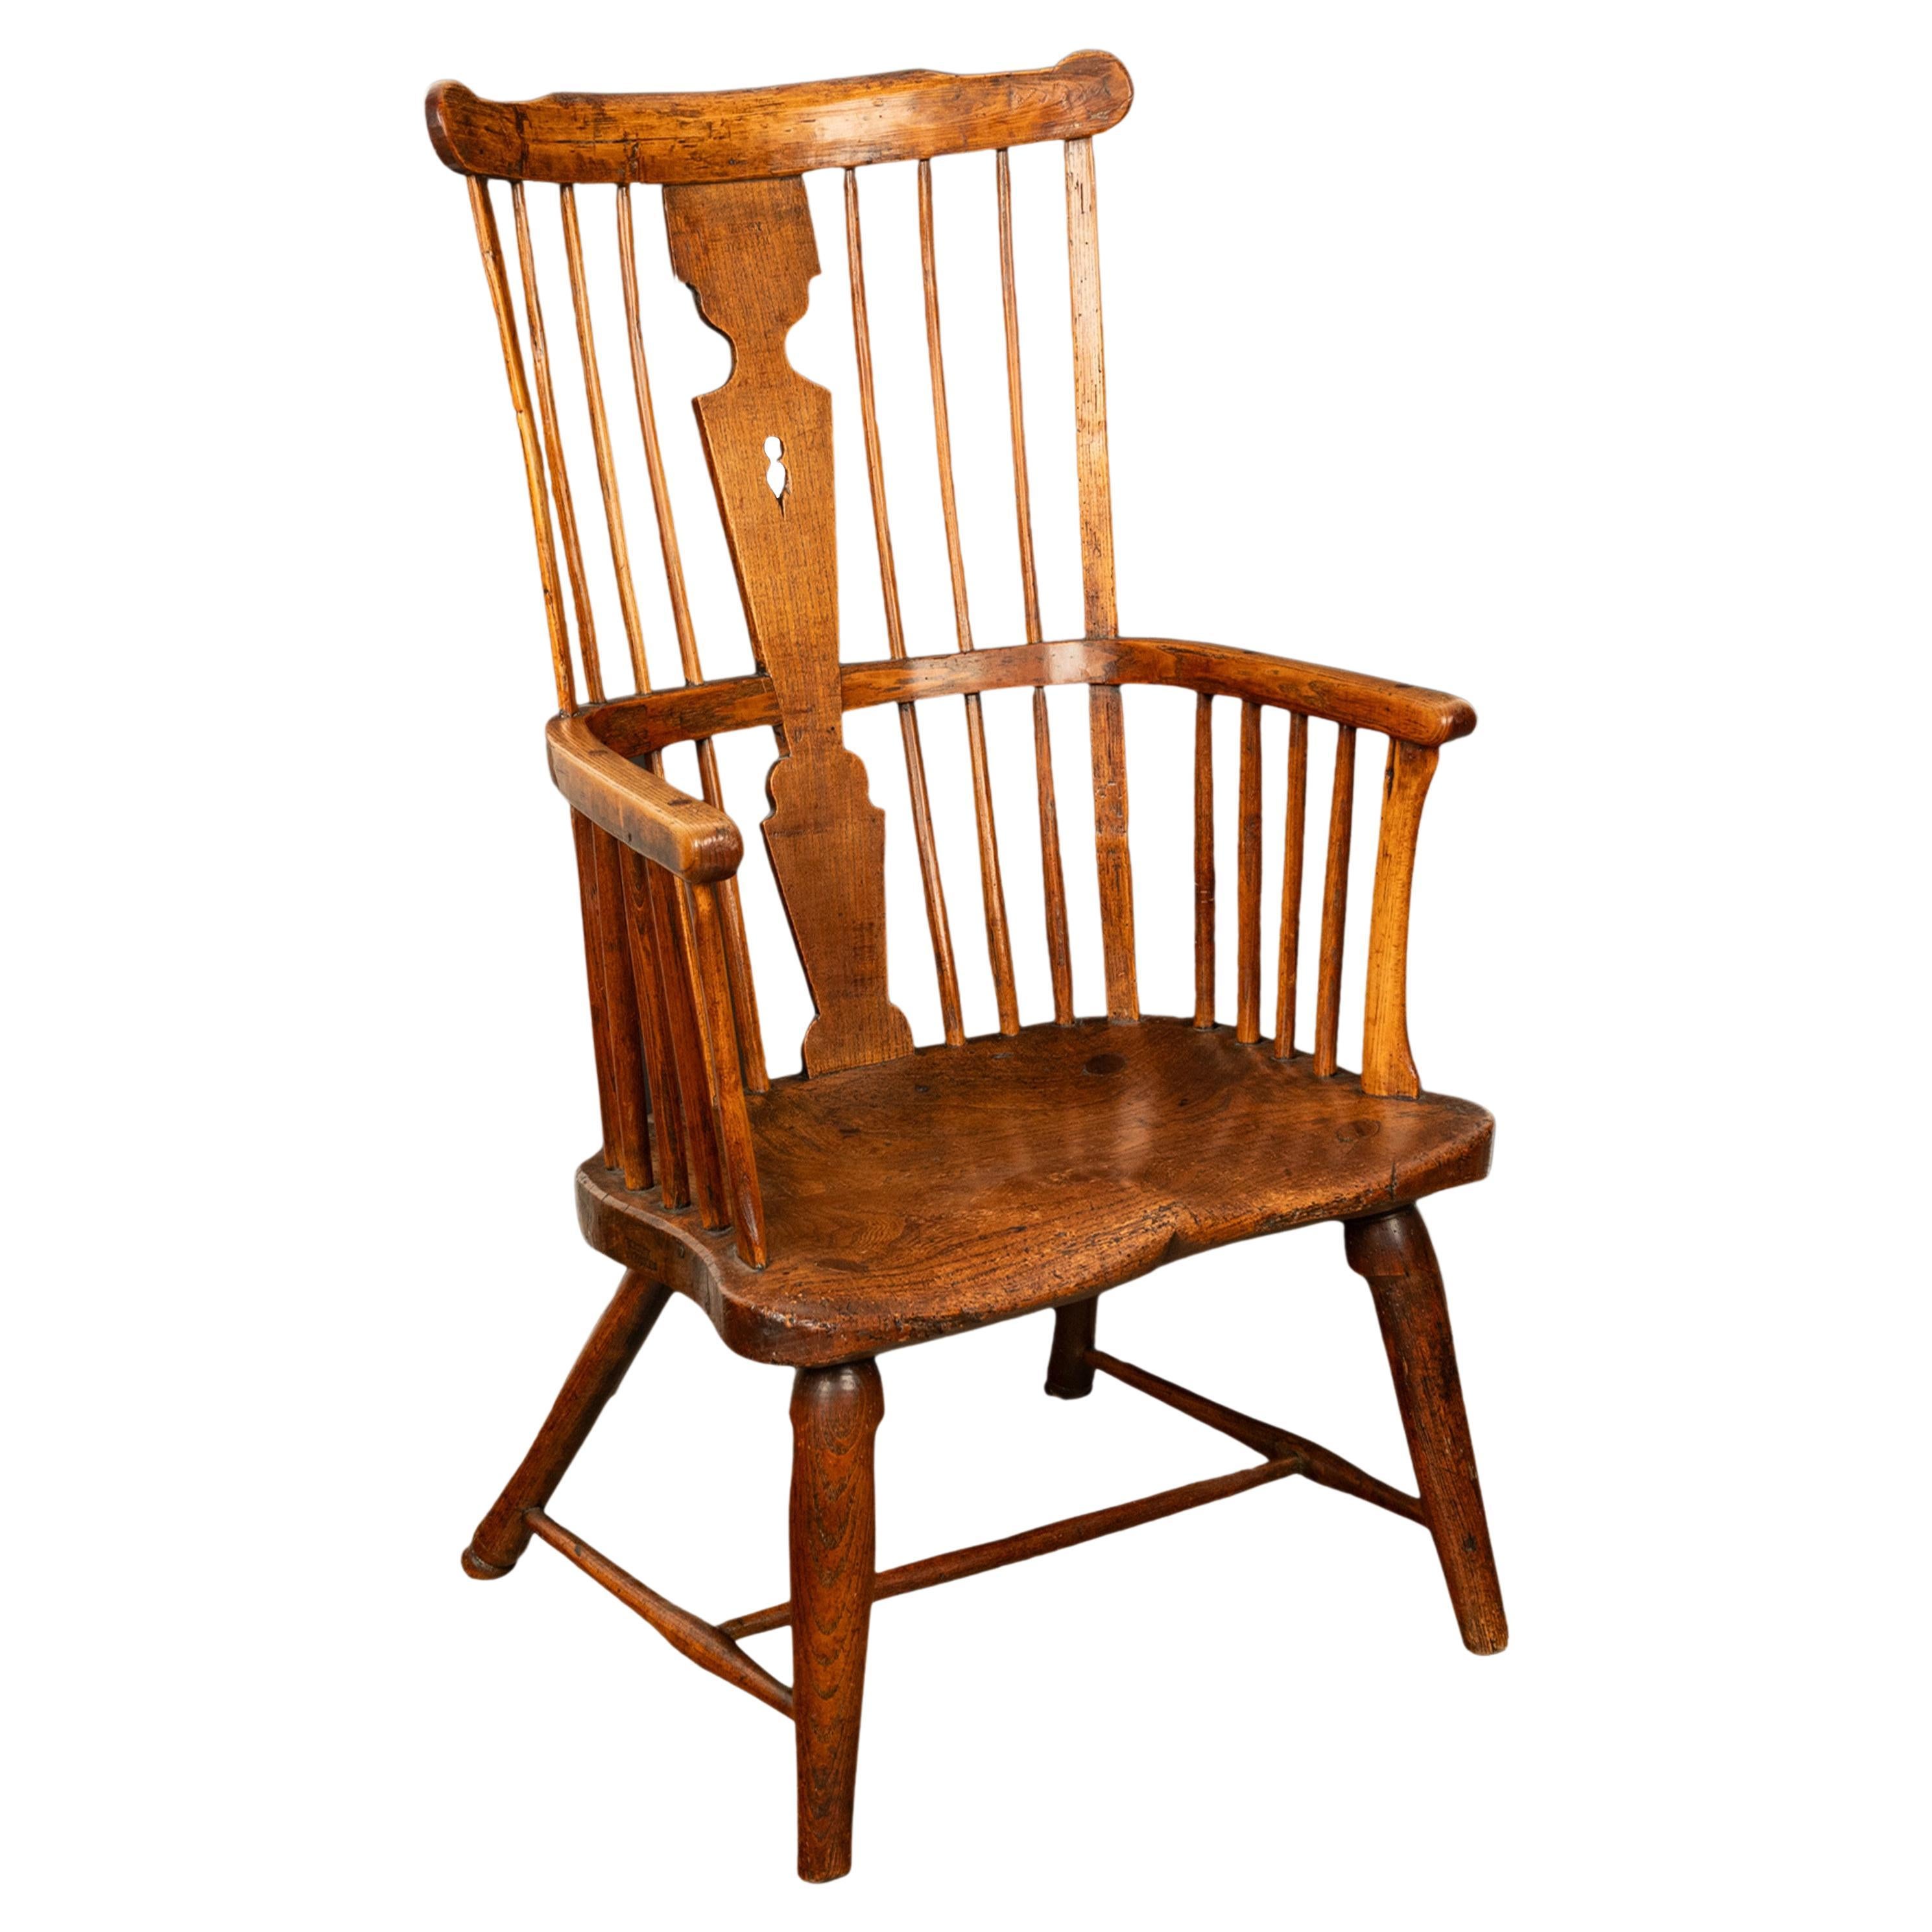 Important Antique Earliest Recorded English Windsor Chair by Kerry Evesham 1793 For Sale